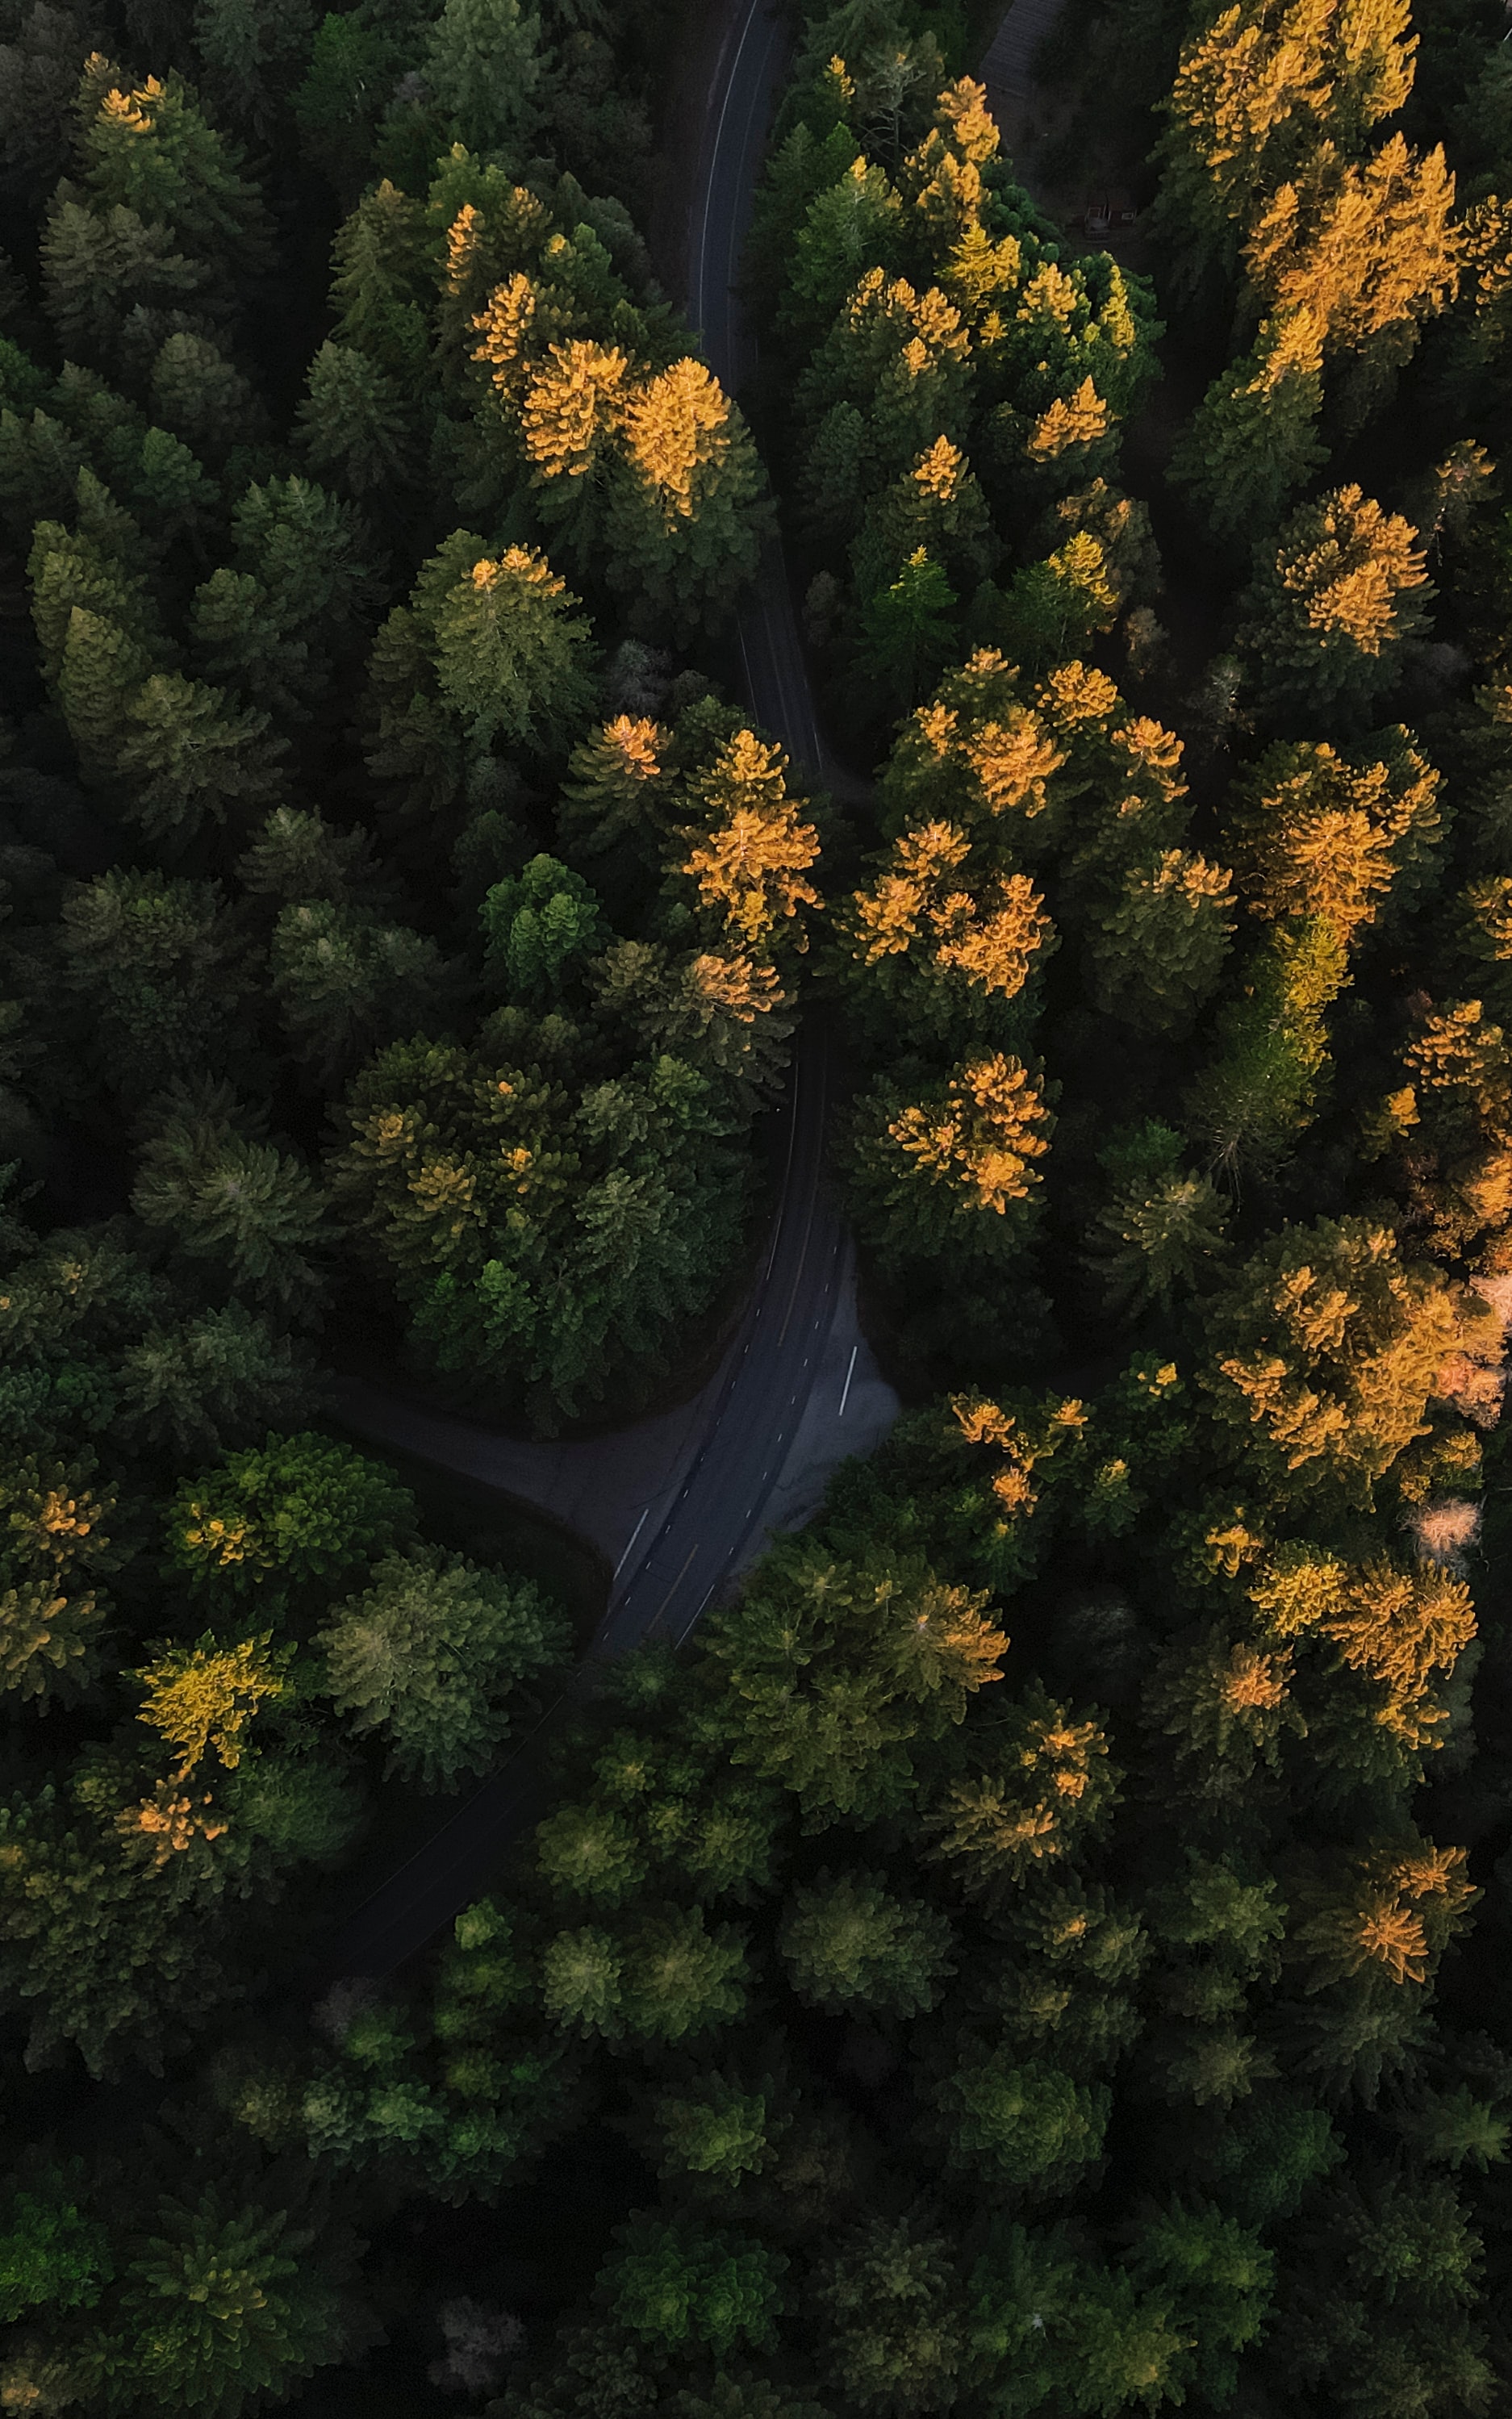 view from above, nature, trees, road, forest, winding, sinuous cellphone